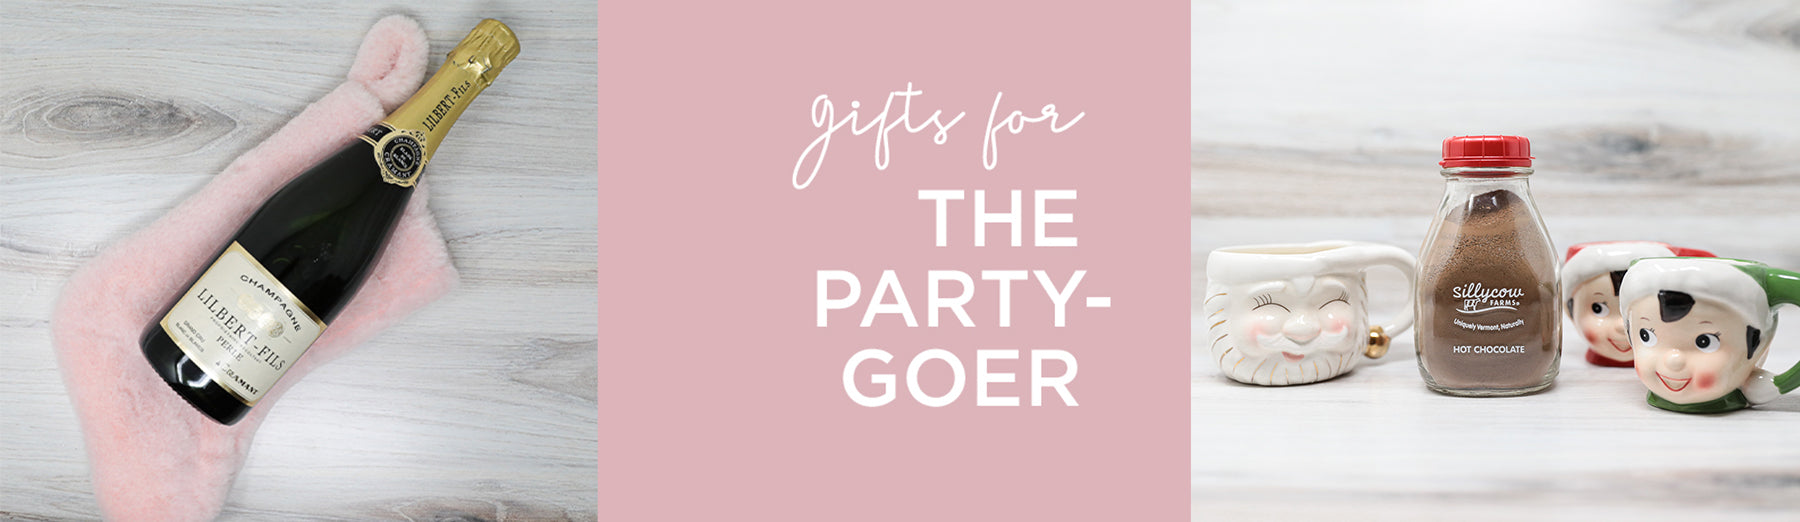 HOLIDAY GIFT GUIDE: THE PARTY-GOER